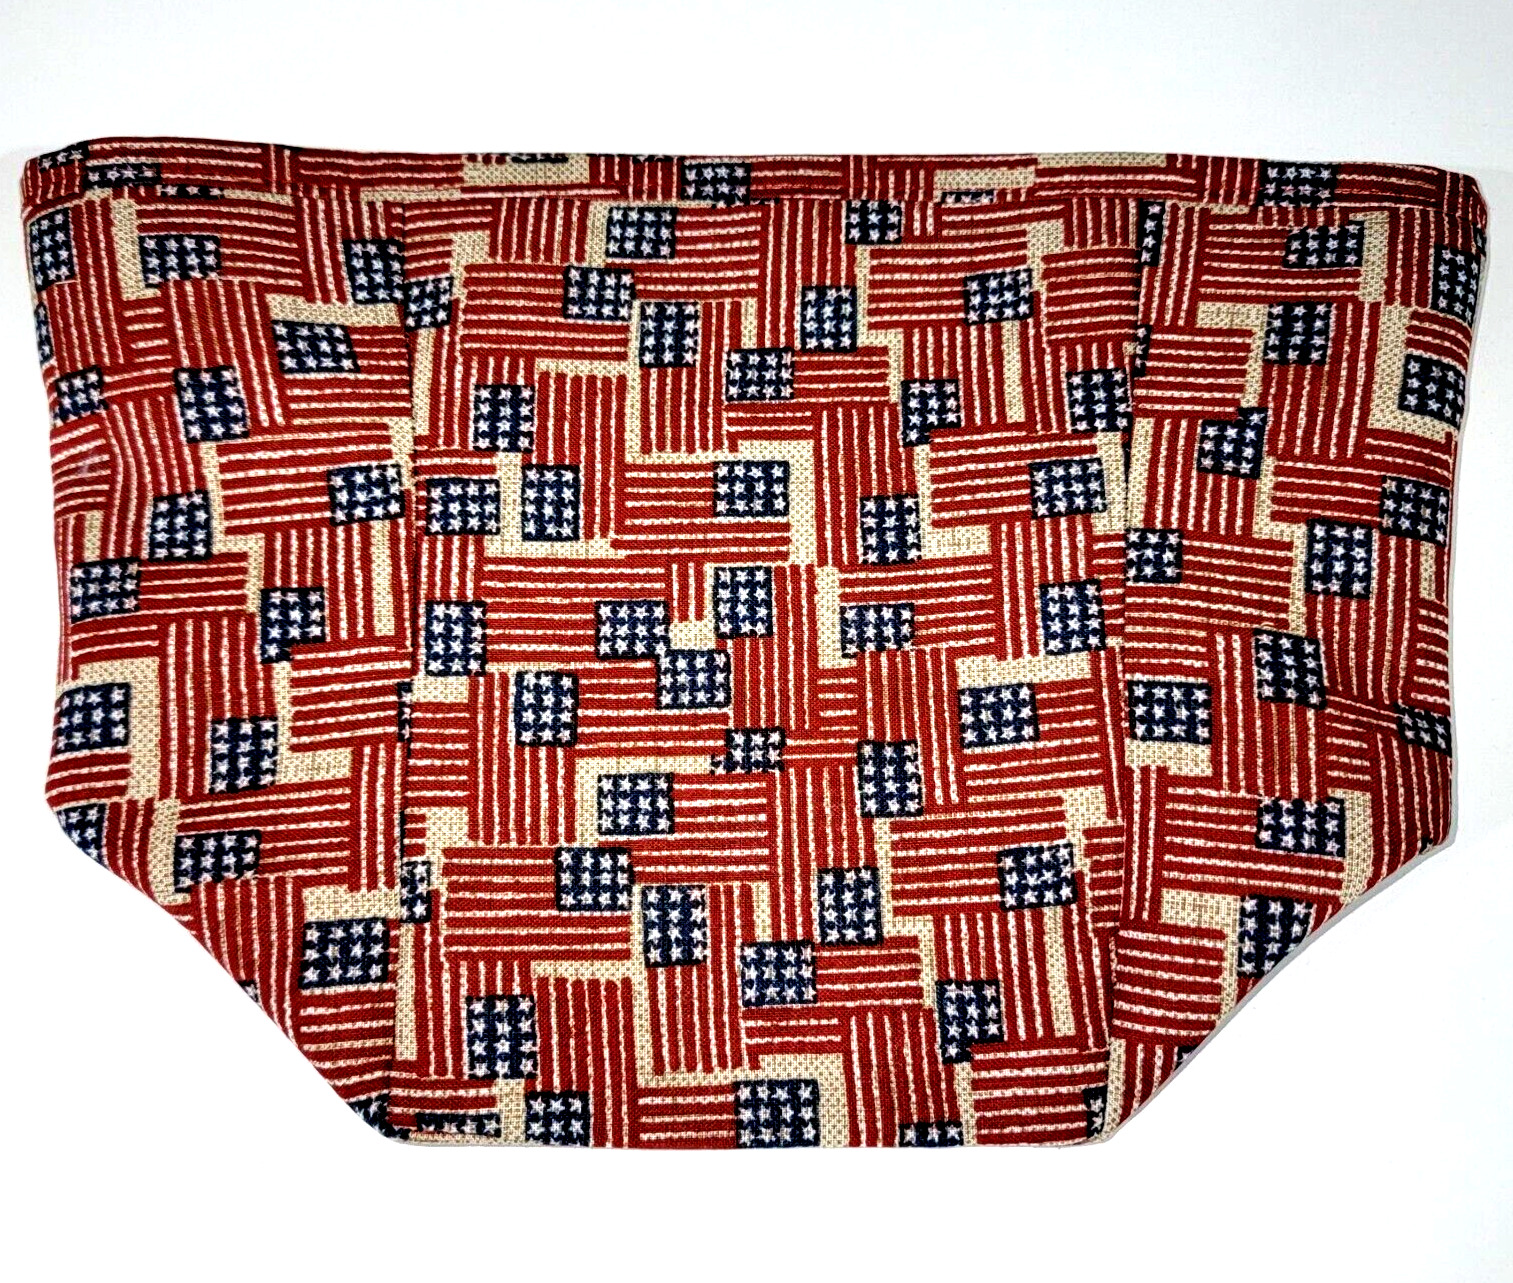 Crazy Good Tall Tissue Basket Liner from Longaberger Old Glory fabric